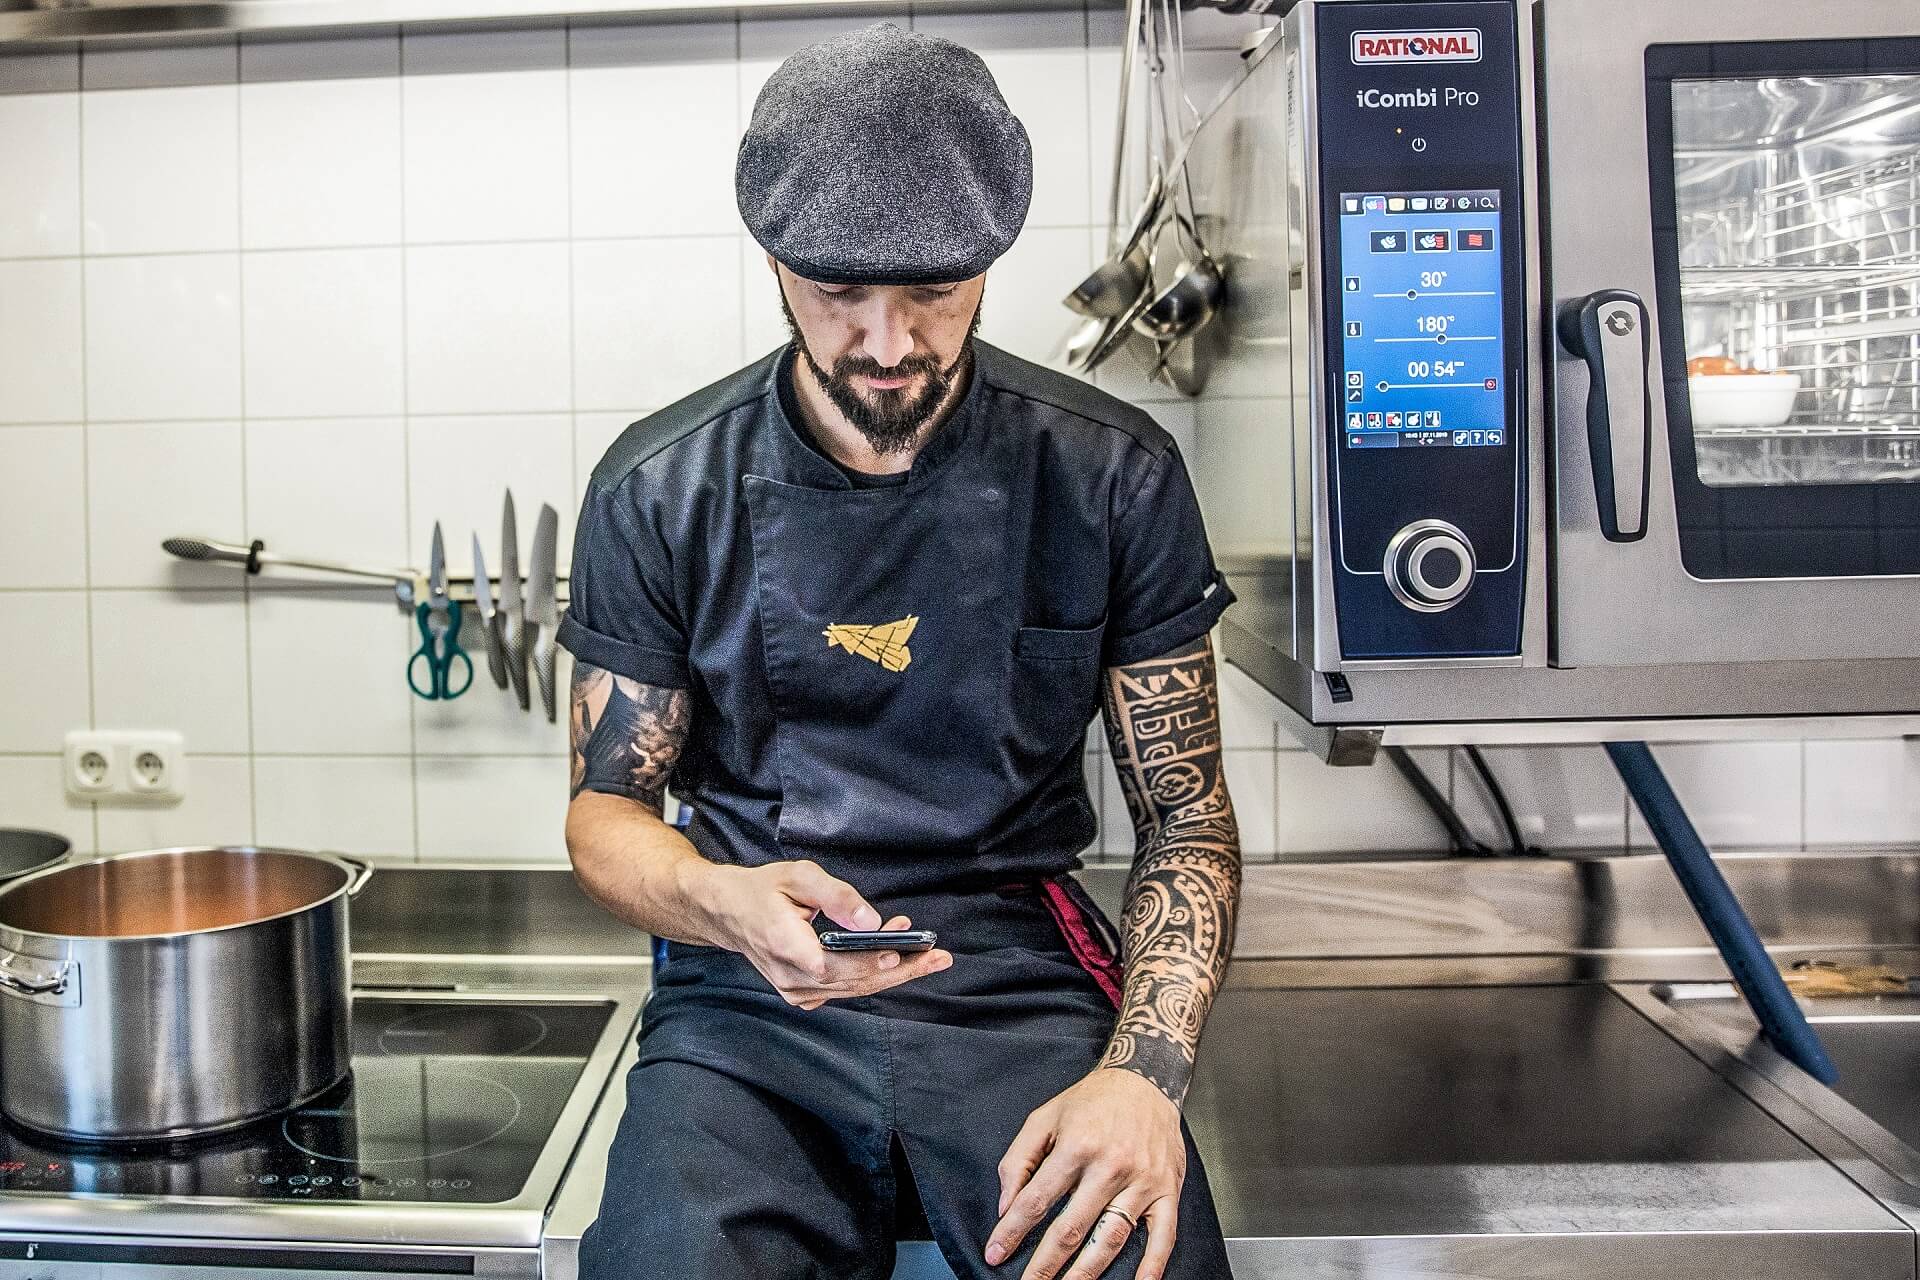 Inked chef sitting in the kitchen checking social media channels for inspirations and information.